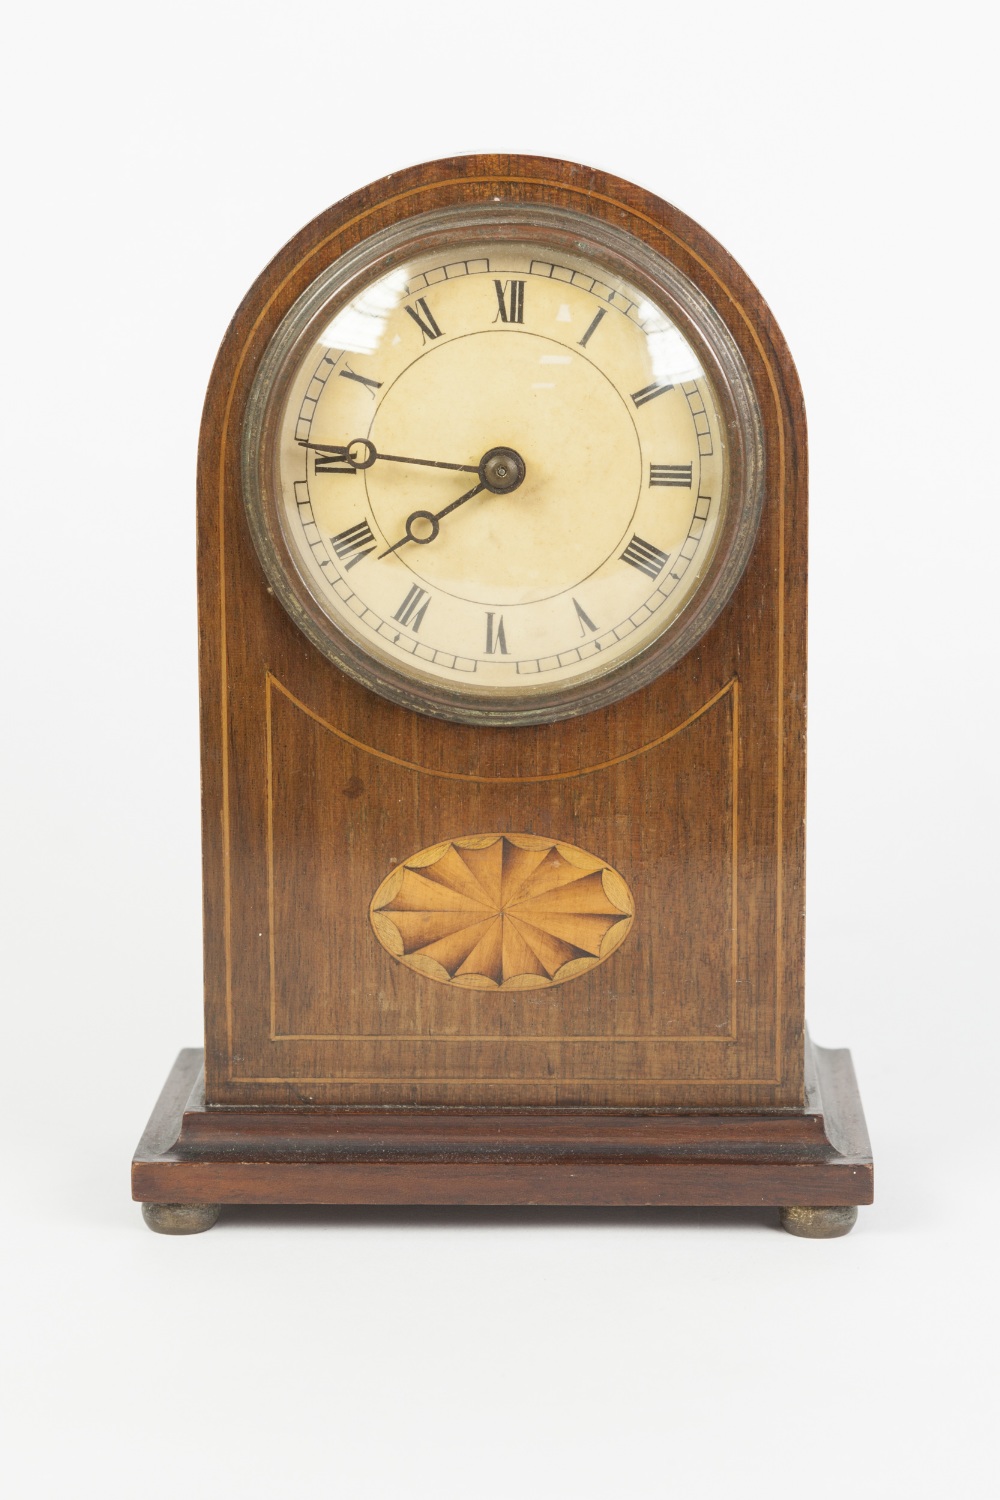 EDWARDIAN INLAID MAHOGANY SMALL MANTLE CLOCK, the 3 ¼" Roam dial powered by a drum shaped movement - Image 2 of 3